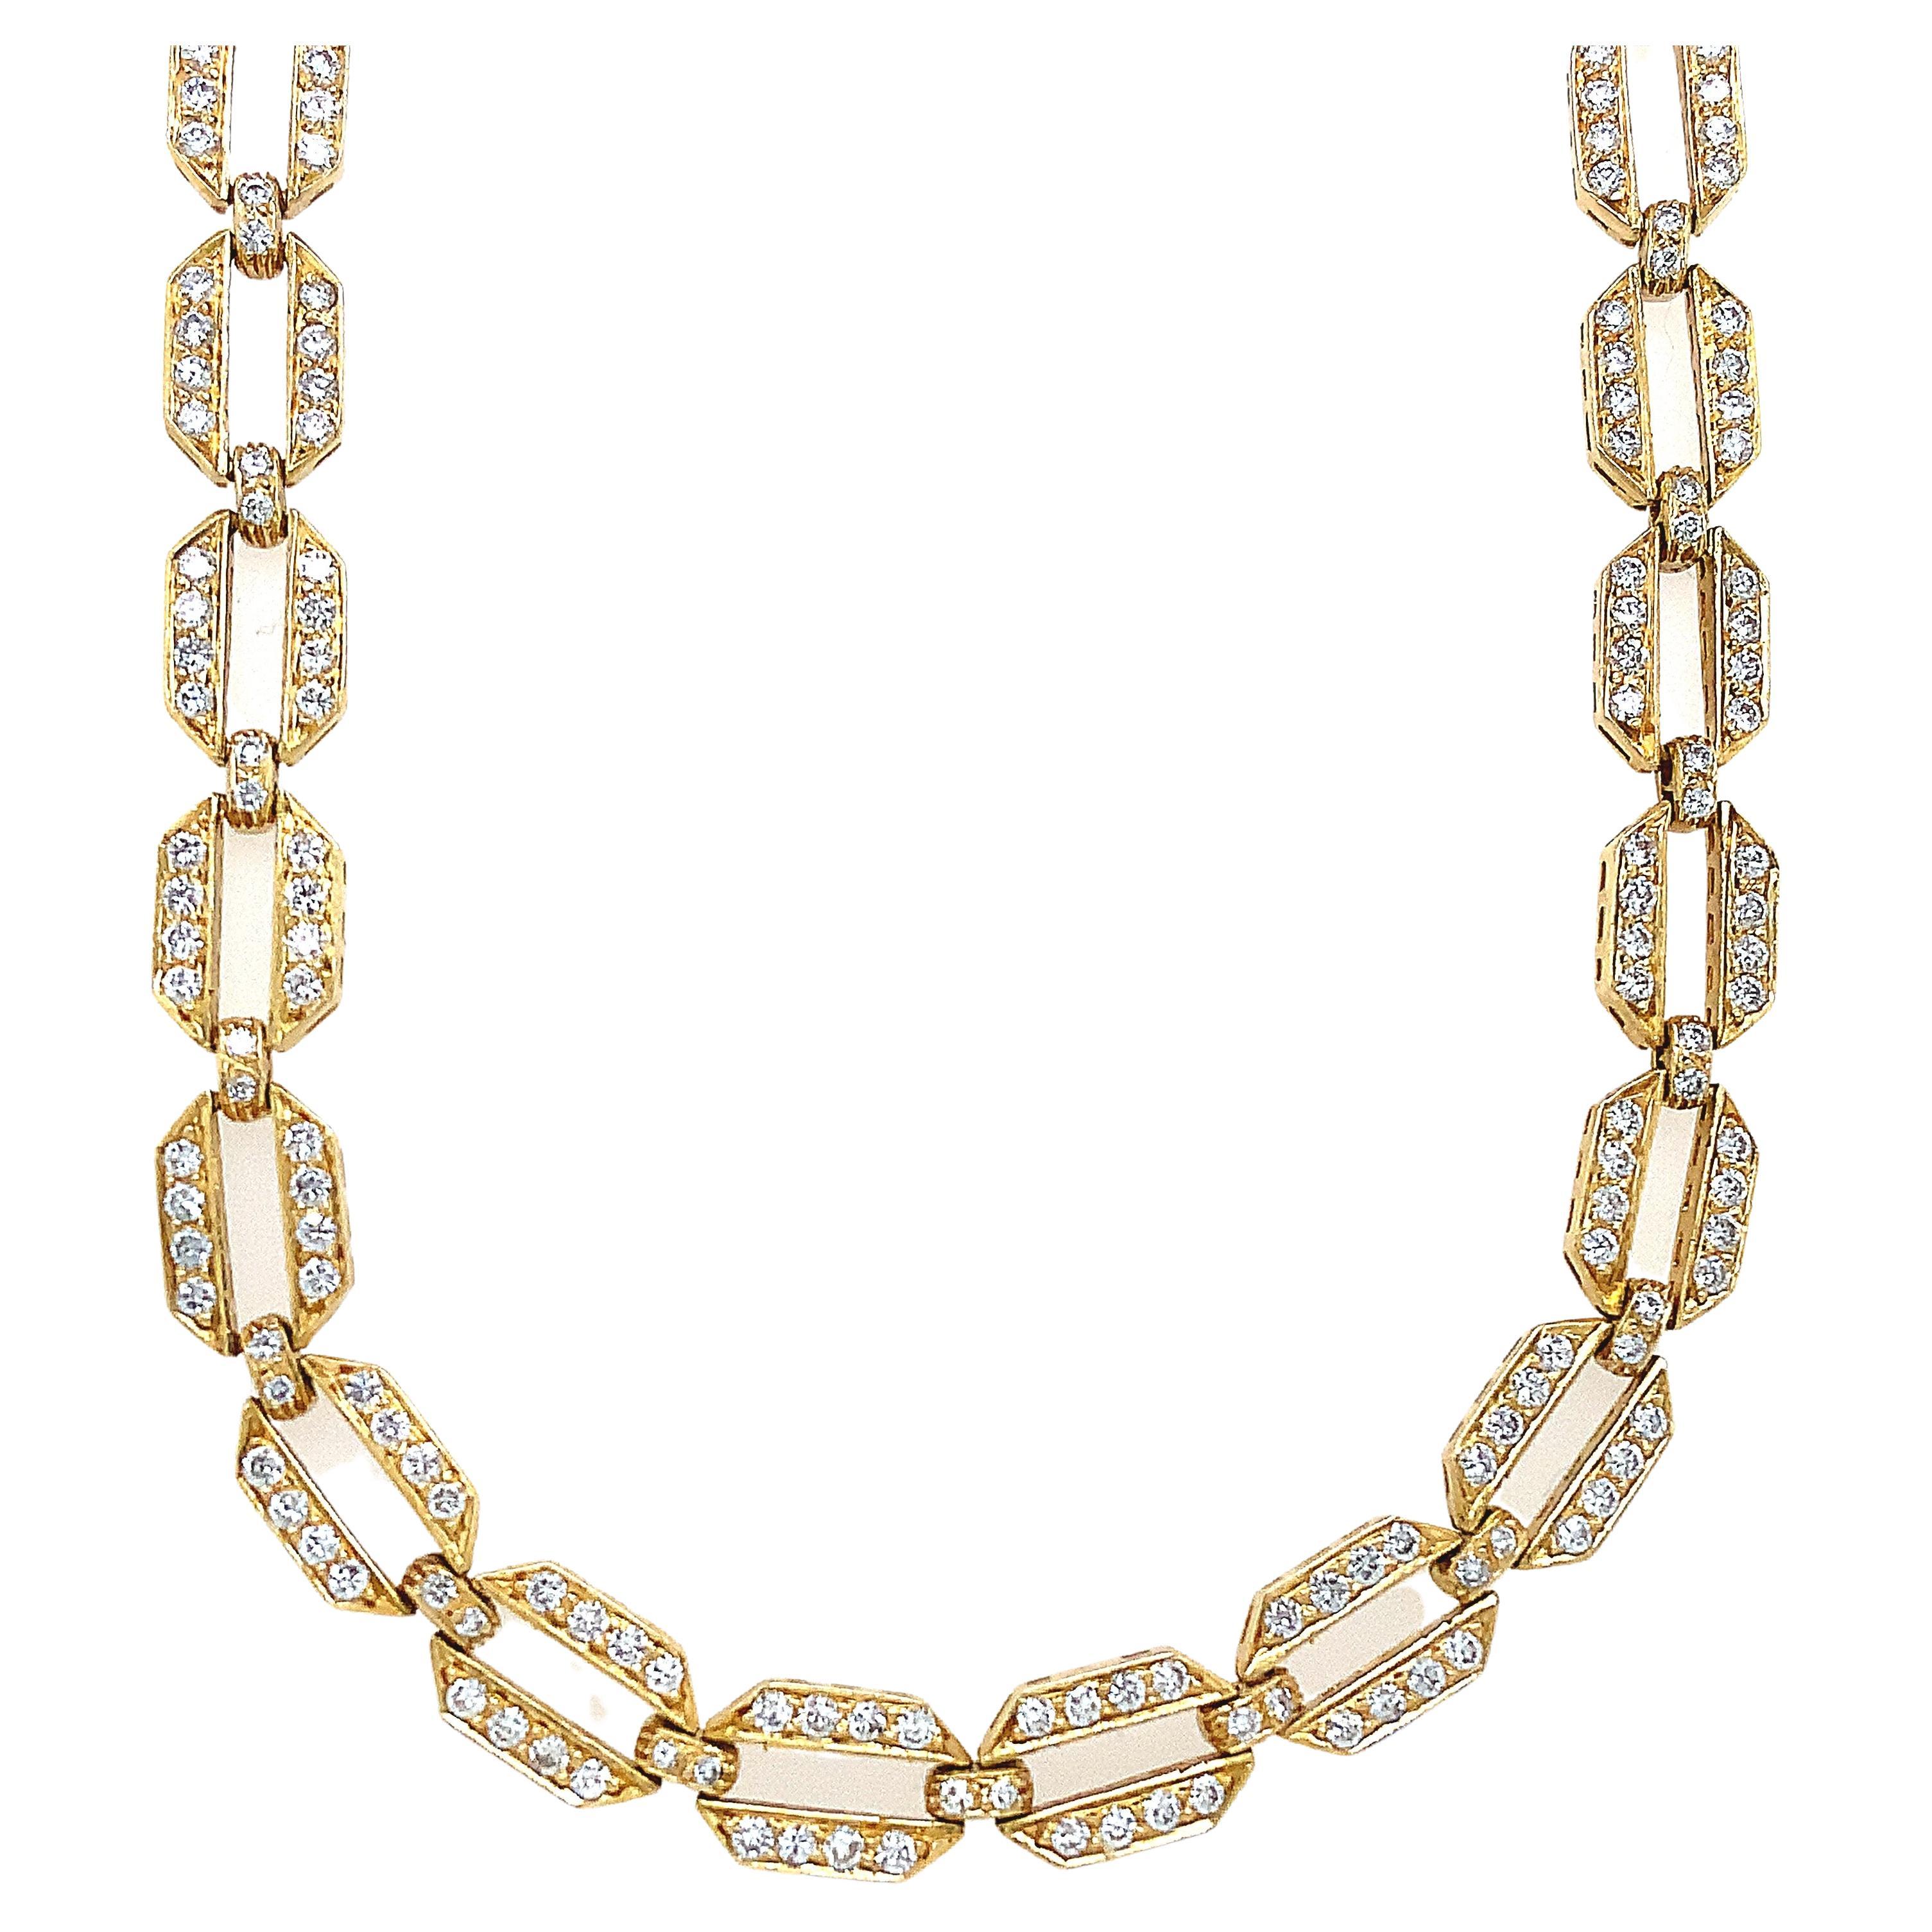 Important One of a Kind Vintage Diamond Link Necklace set in 18k Yellow Gold